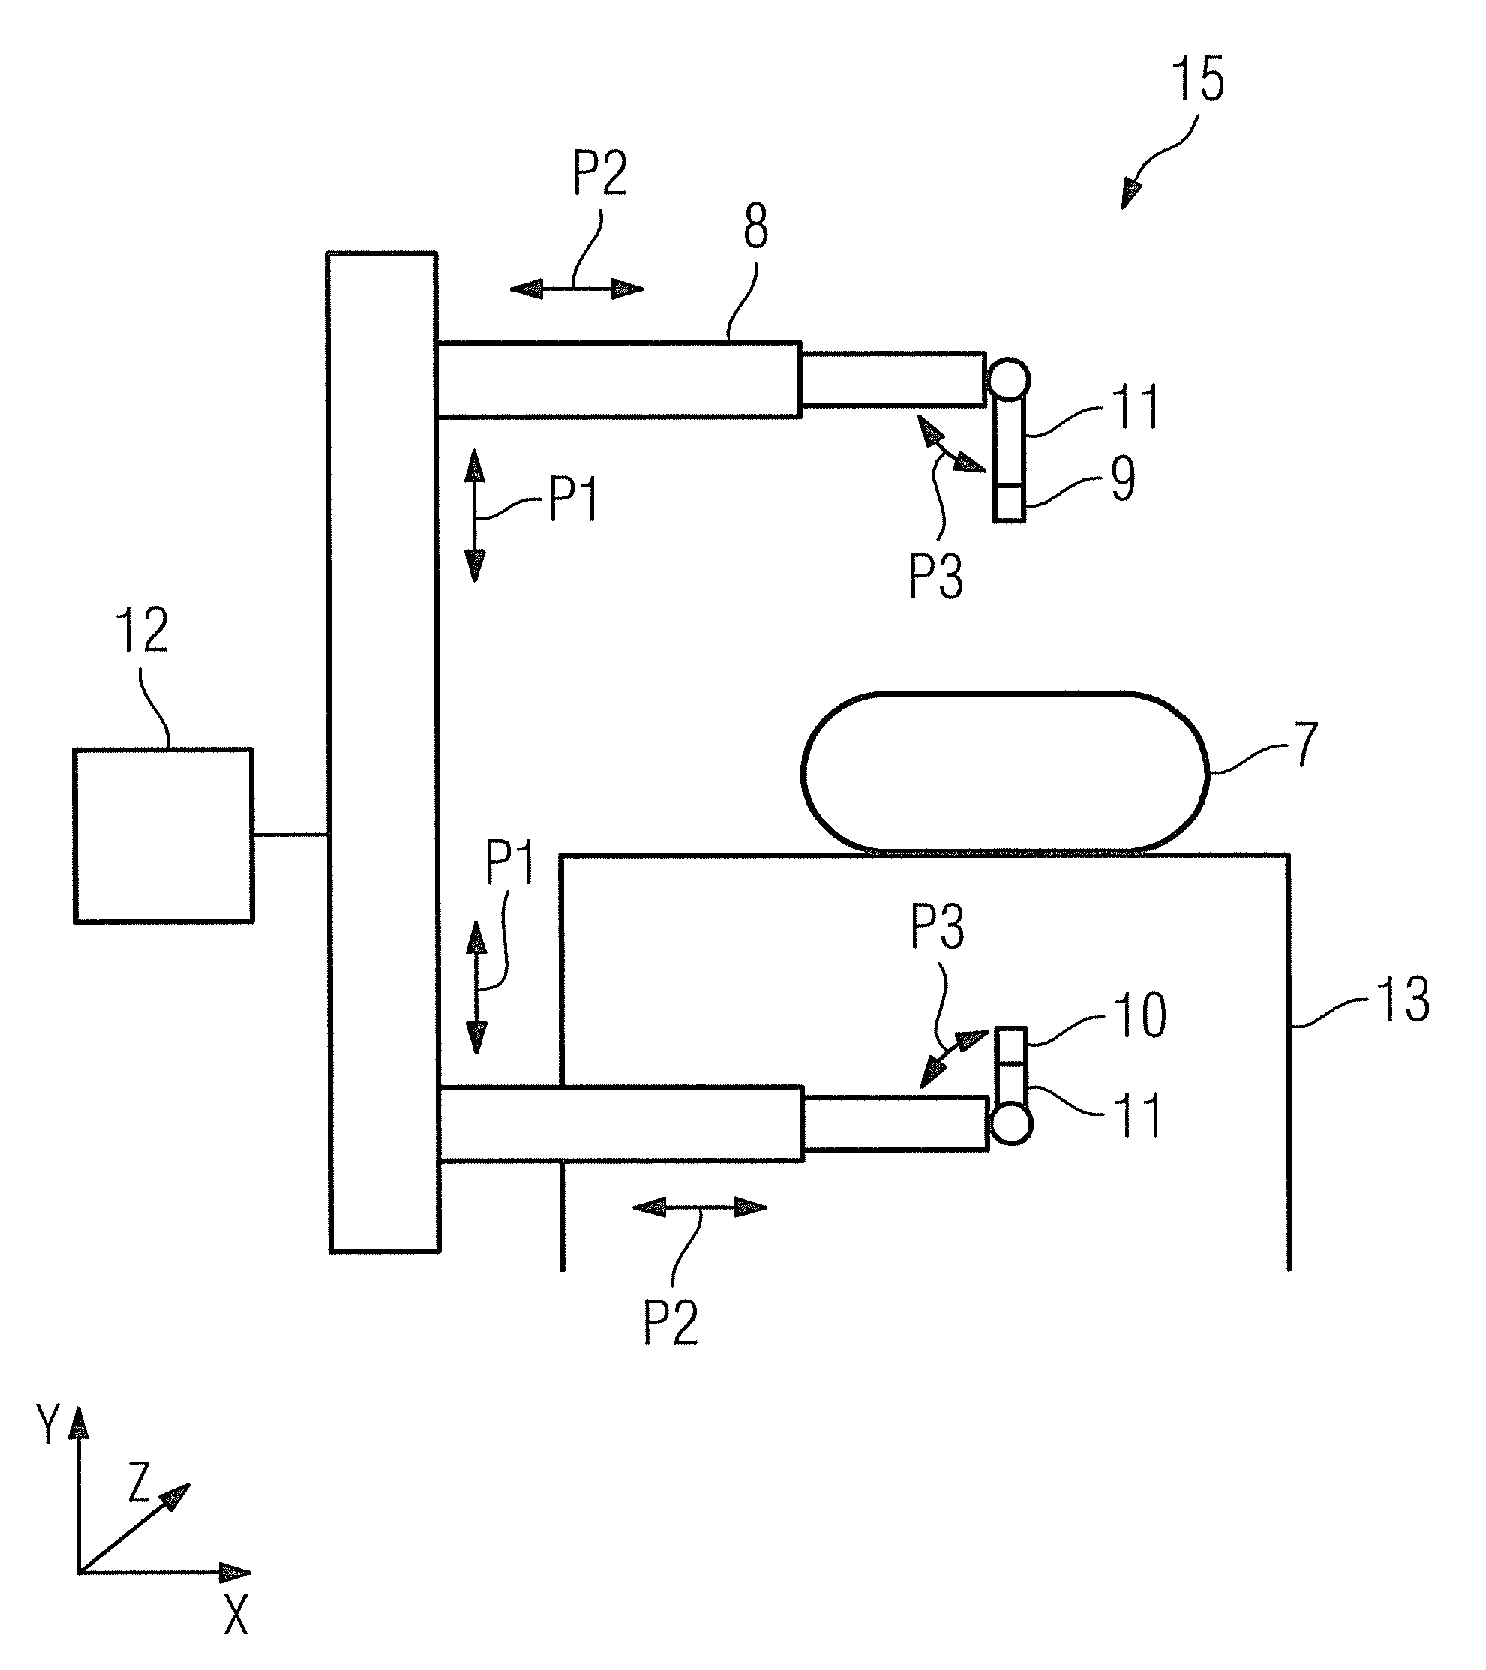 X-ray system and method for the generation of a scan path